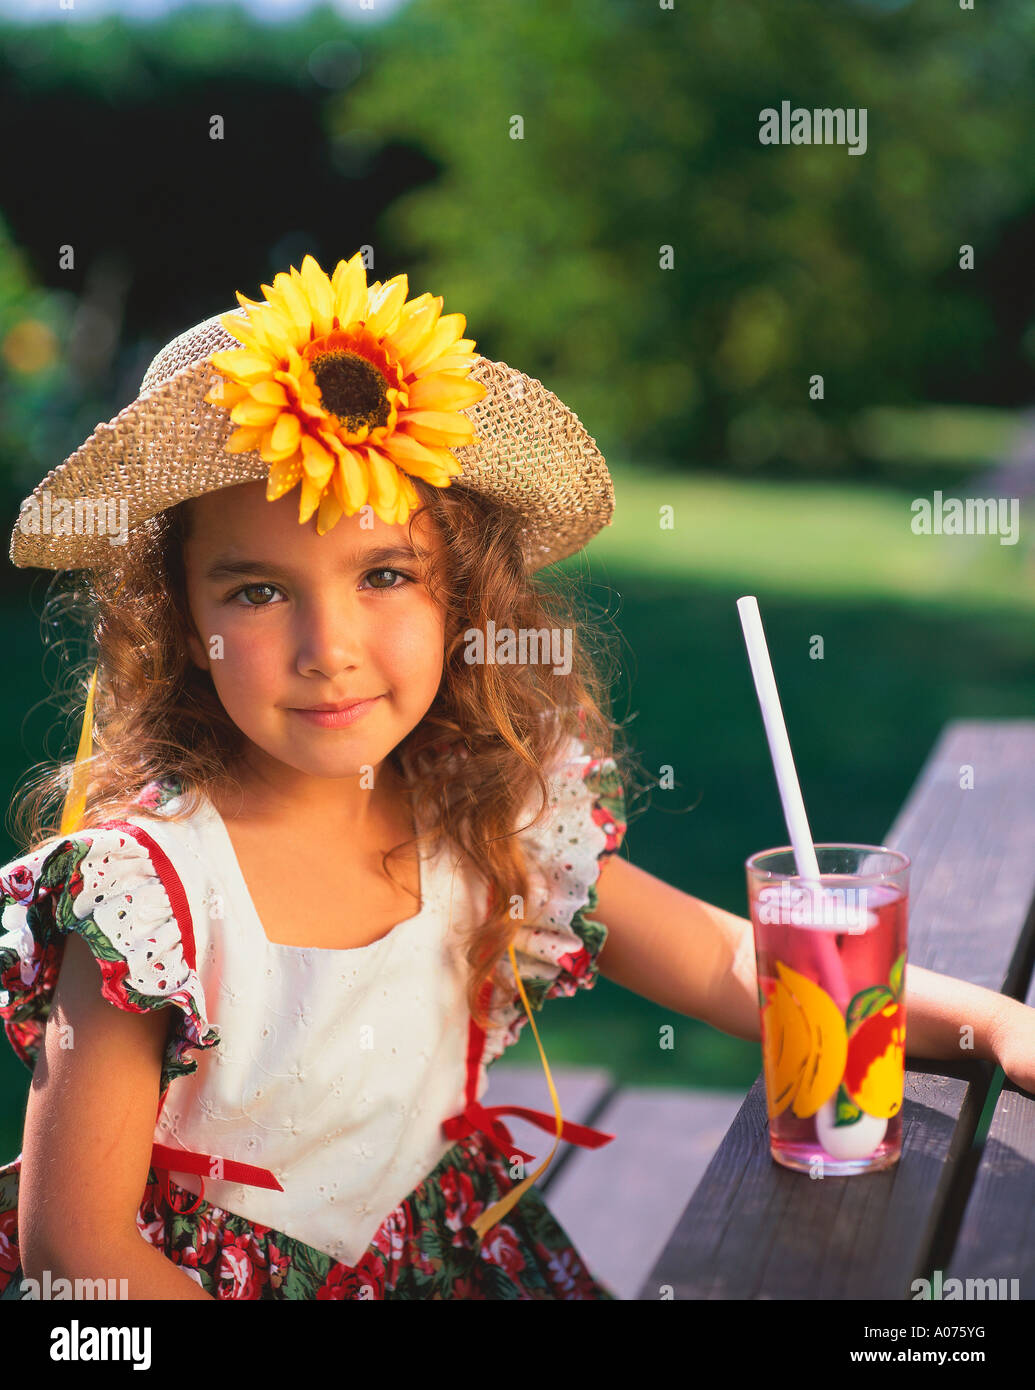 Young Girl Sitting in Garden with Soft Drink and Wearing Straw Hat with Sunflower UK Stock Photo